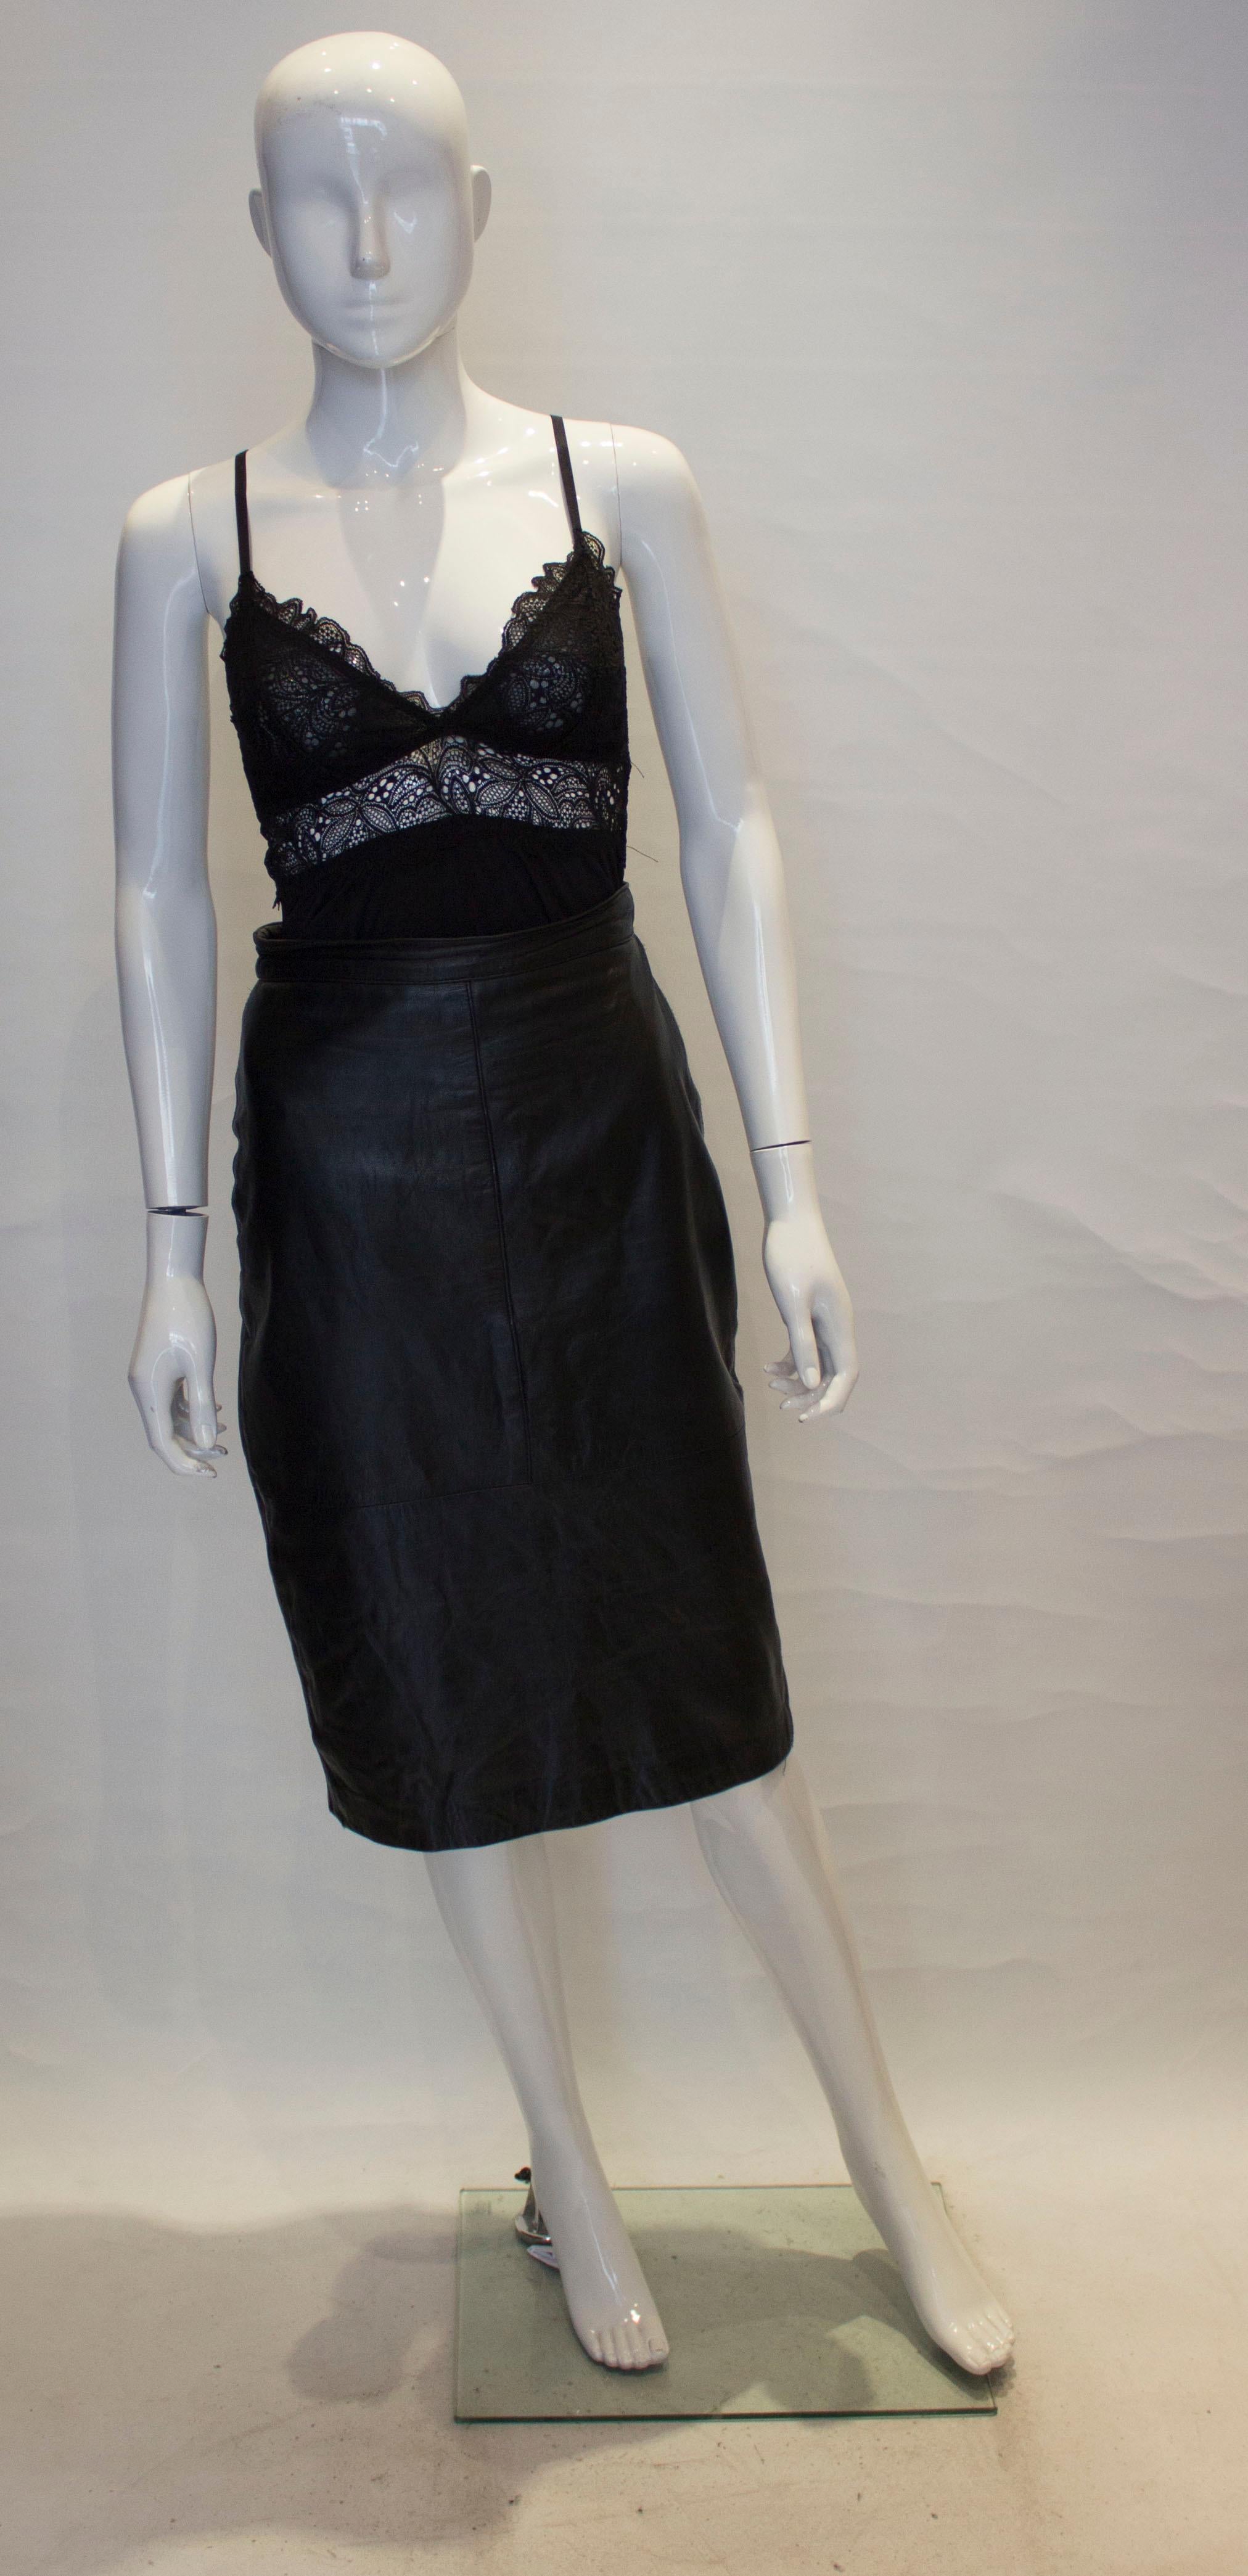 A simple and sophisticated vintage black leather skirt, ideal for work or play.
The skirt is fully lined, with a back central zip and 8'' slit at the rear.